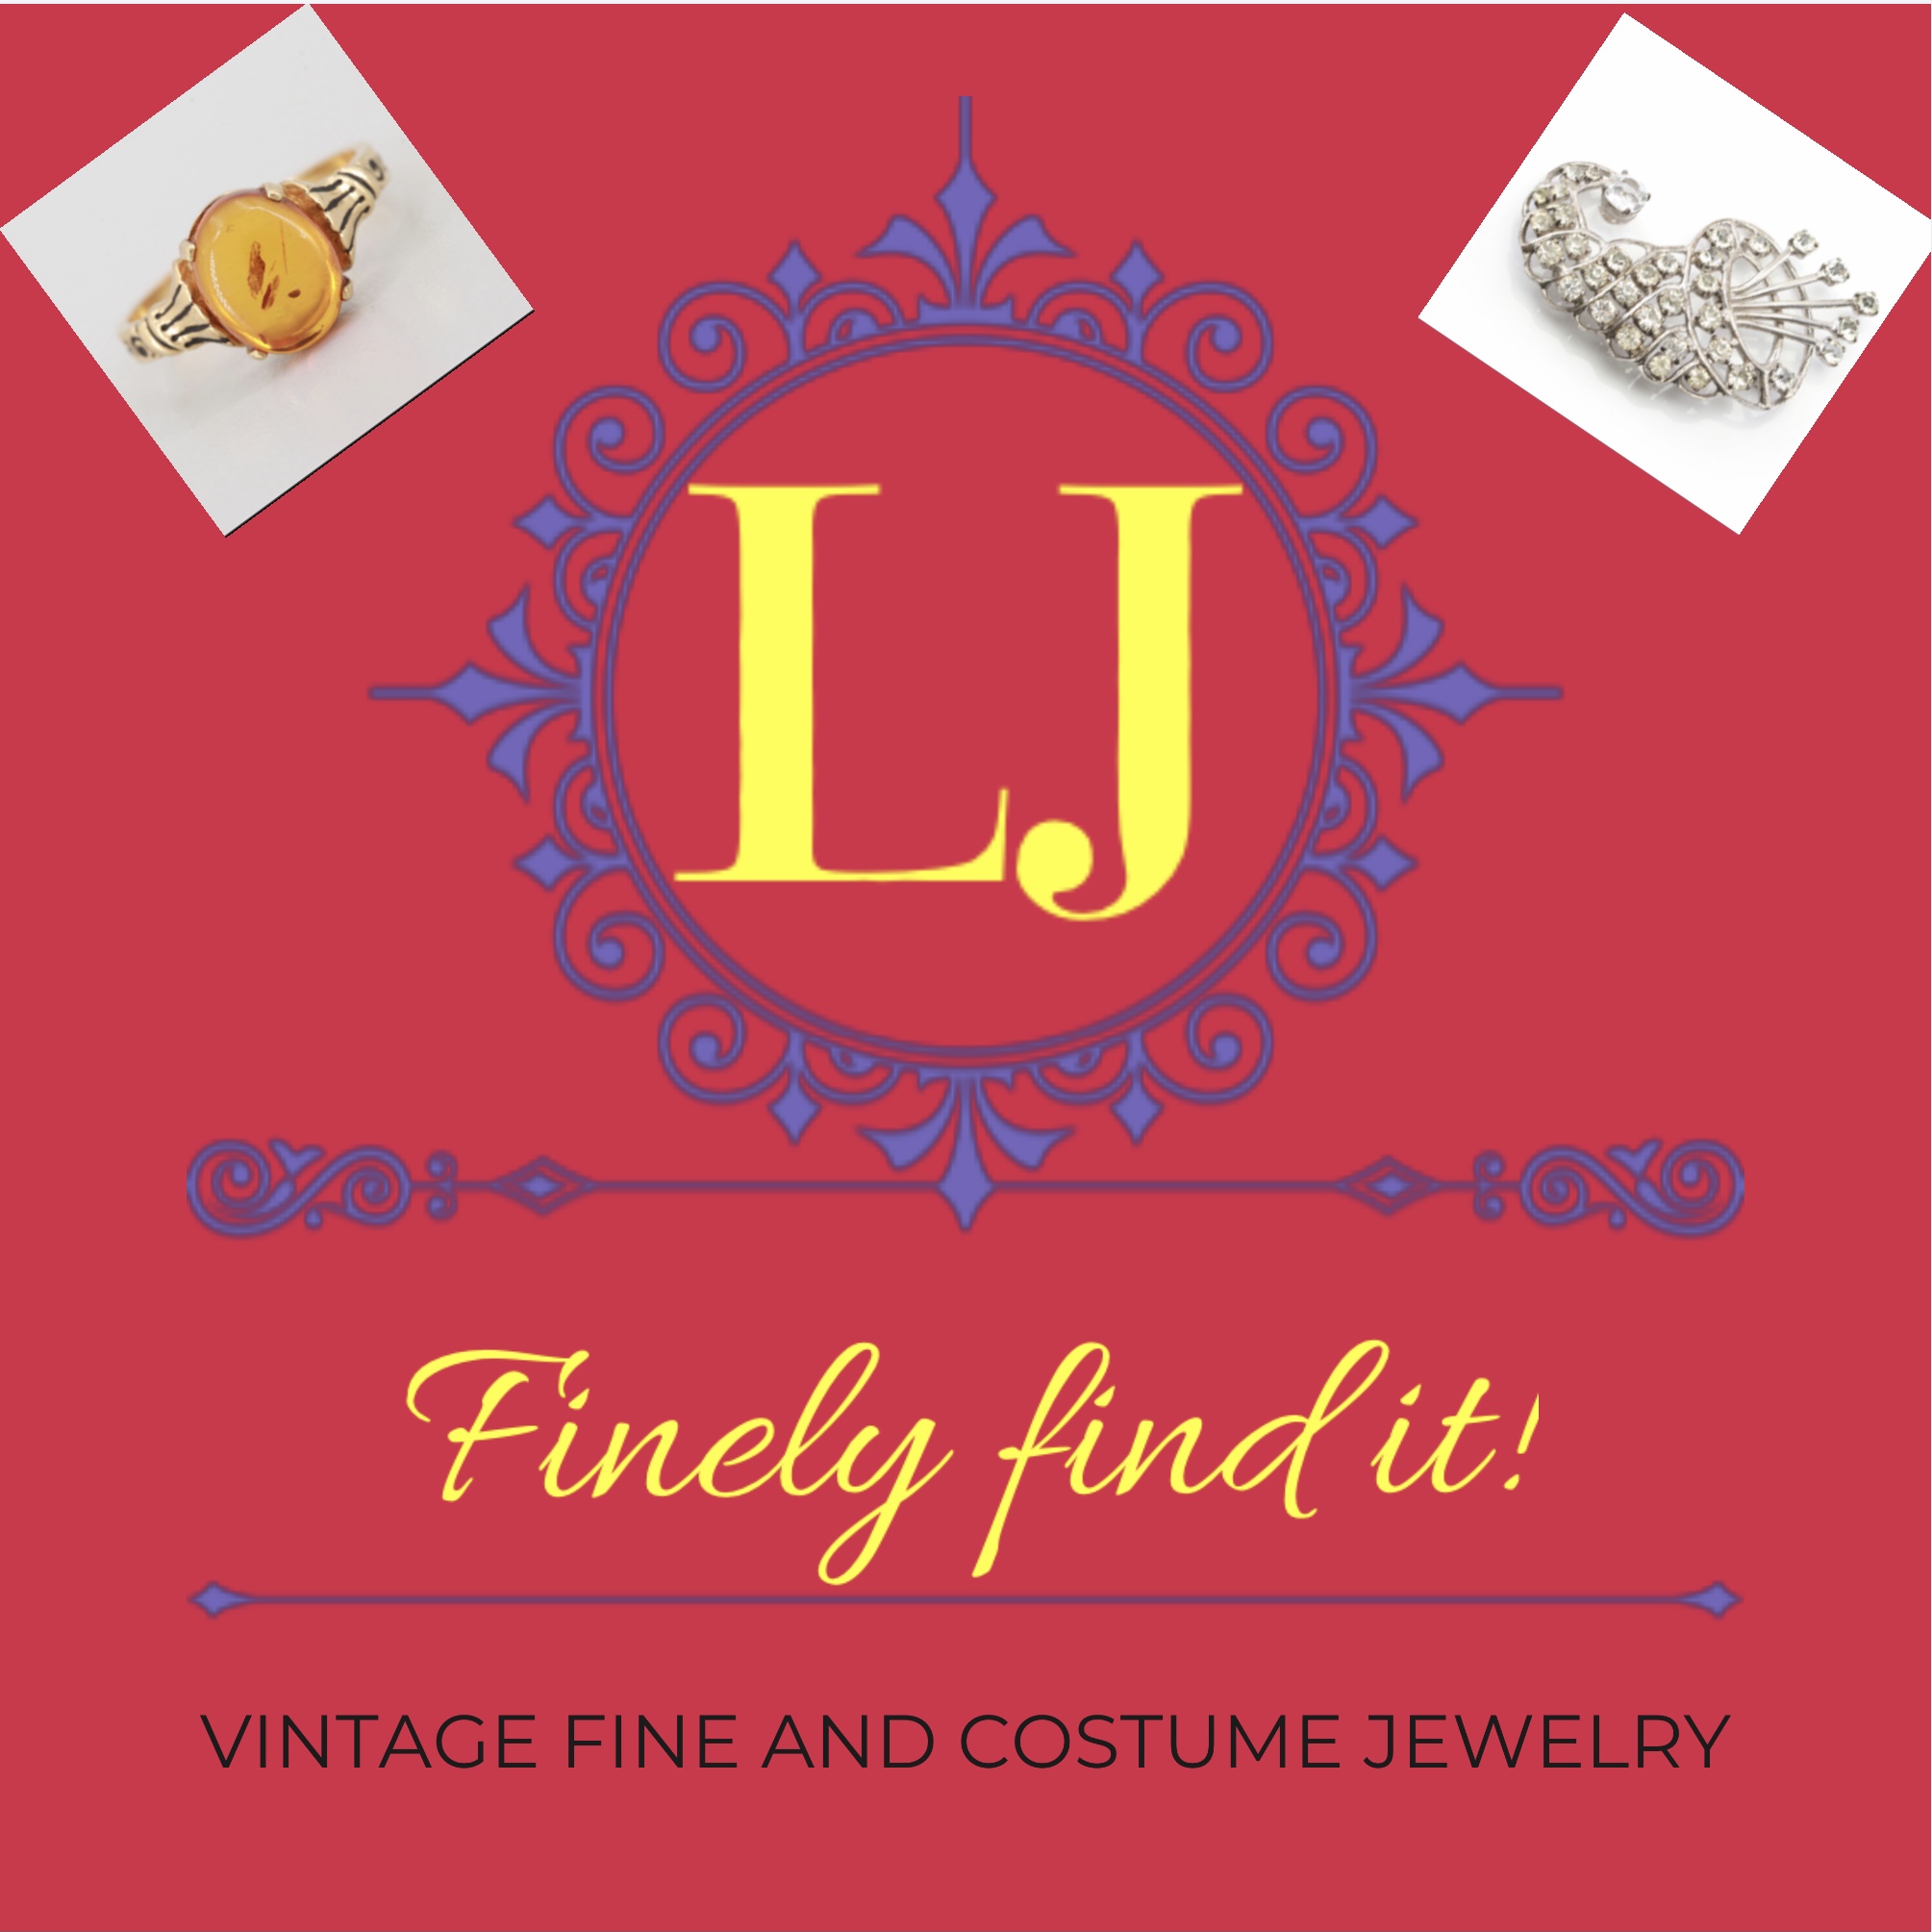 Finely Find It Vintage! | AuctionNinja